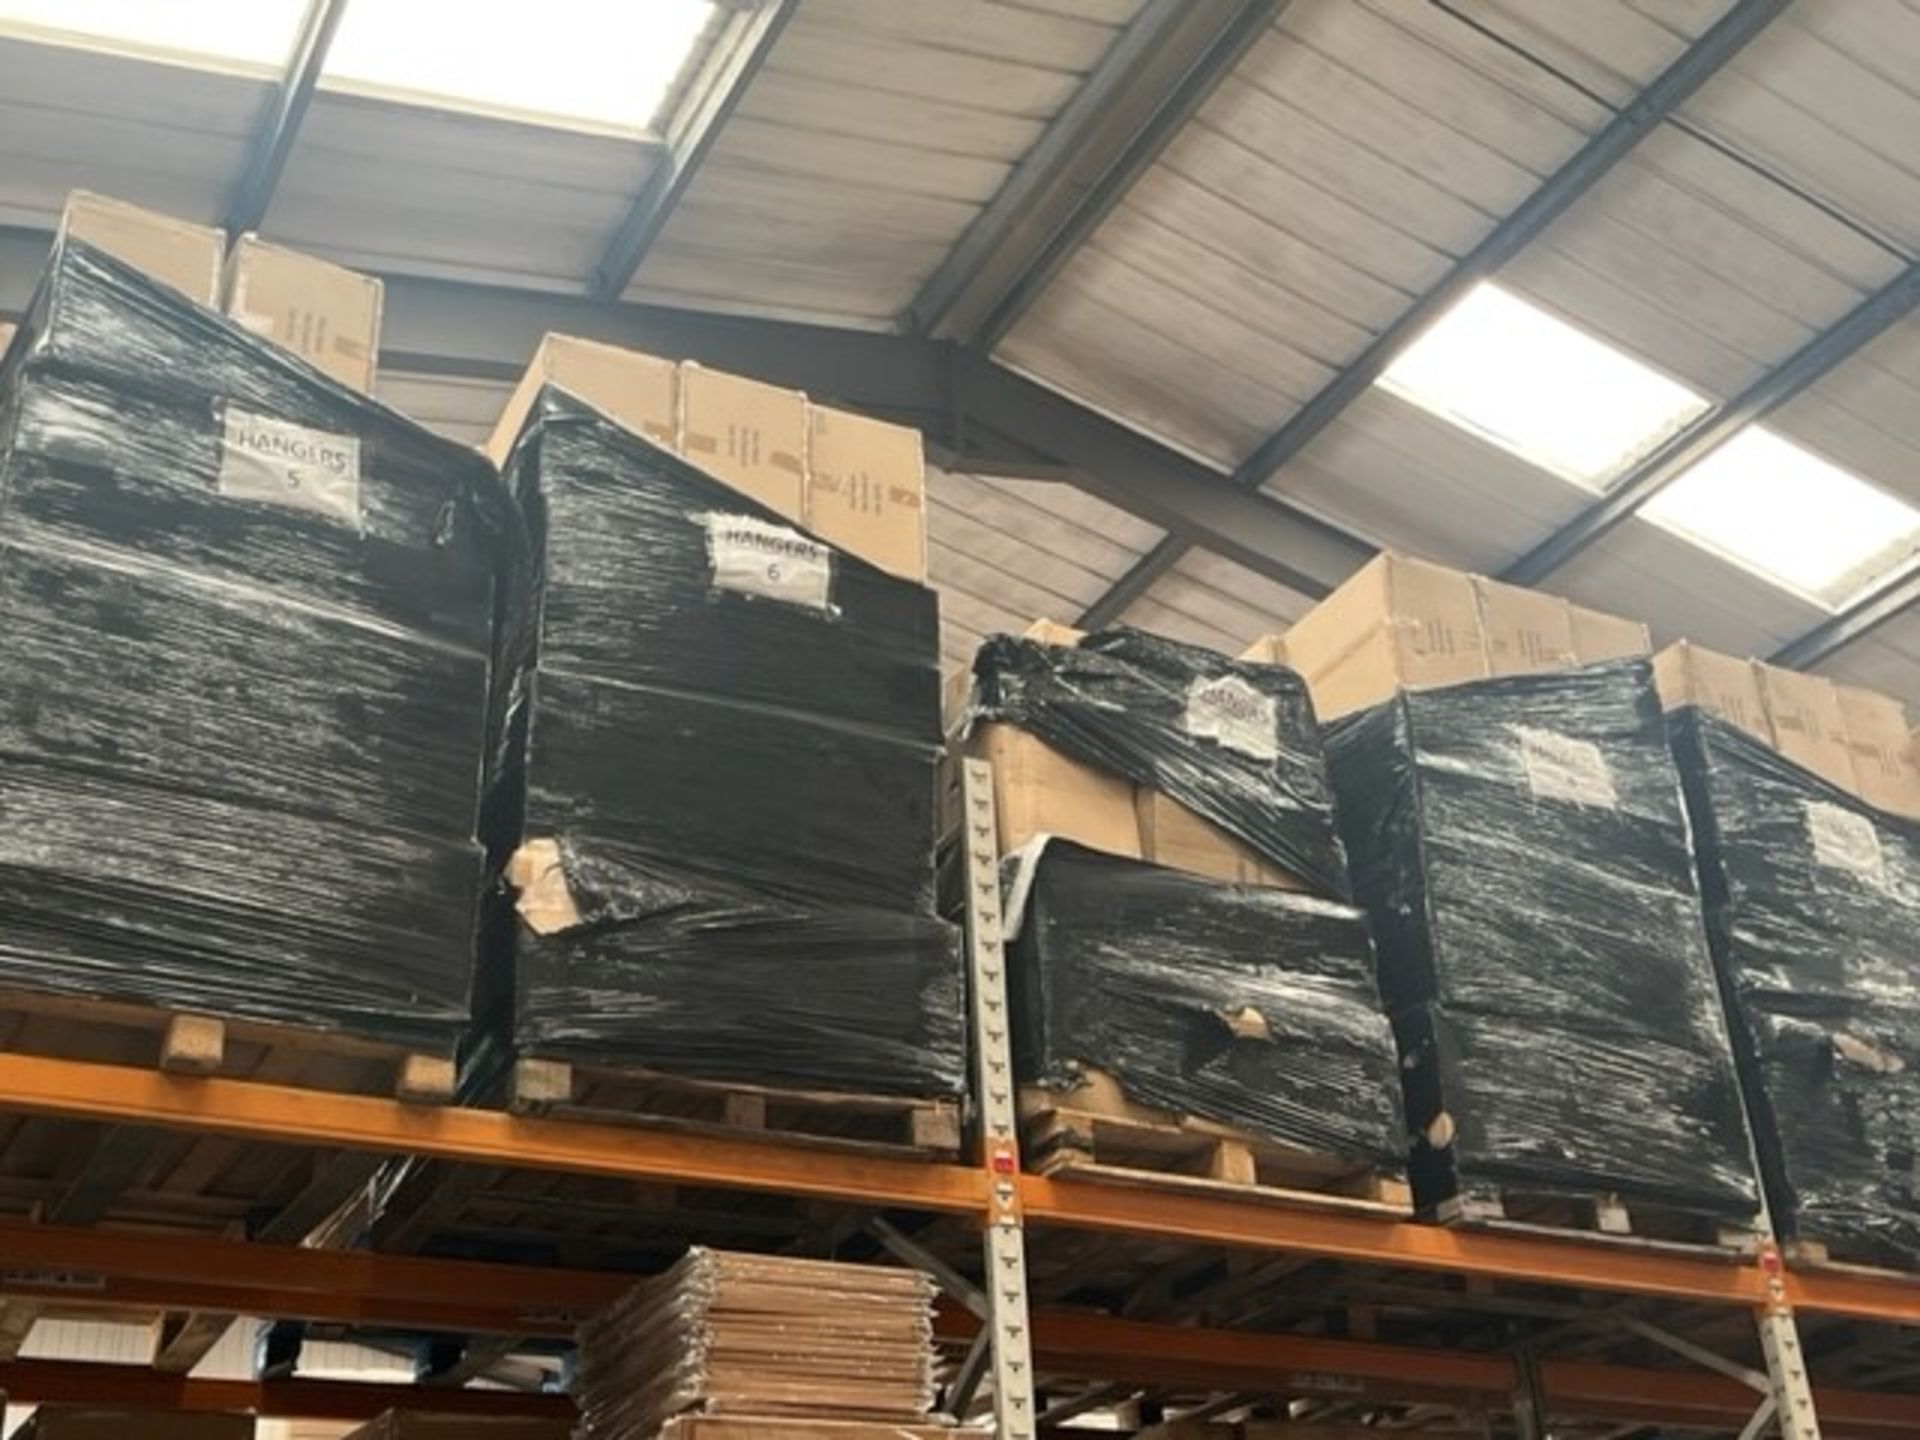 1 PALLET OF 2800 X WOODEN SECURITY COATHANGERS LIGHT WOOD WITH NON-SLIP TROUSER BAR. - Image 3 of 3